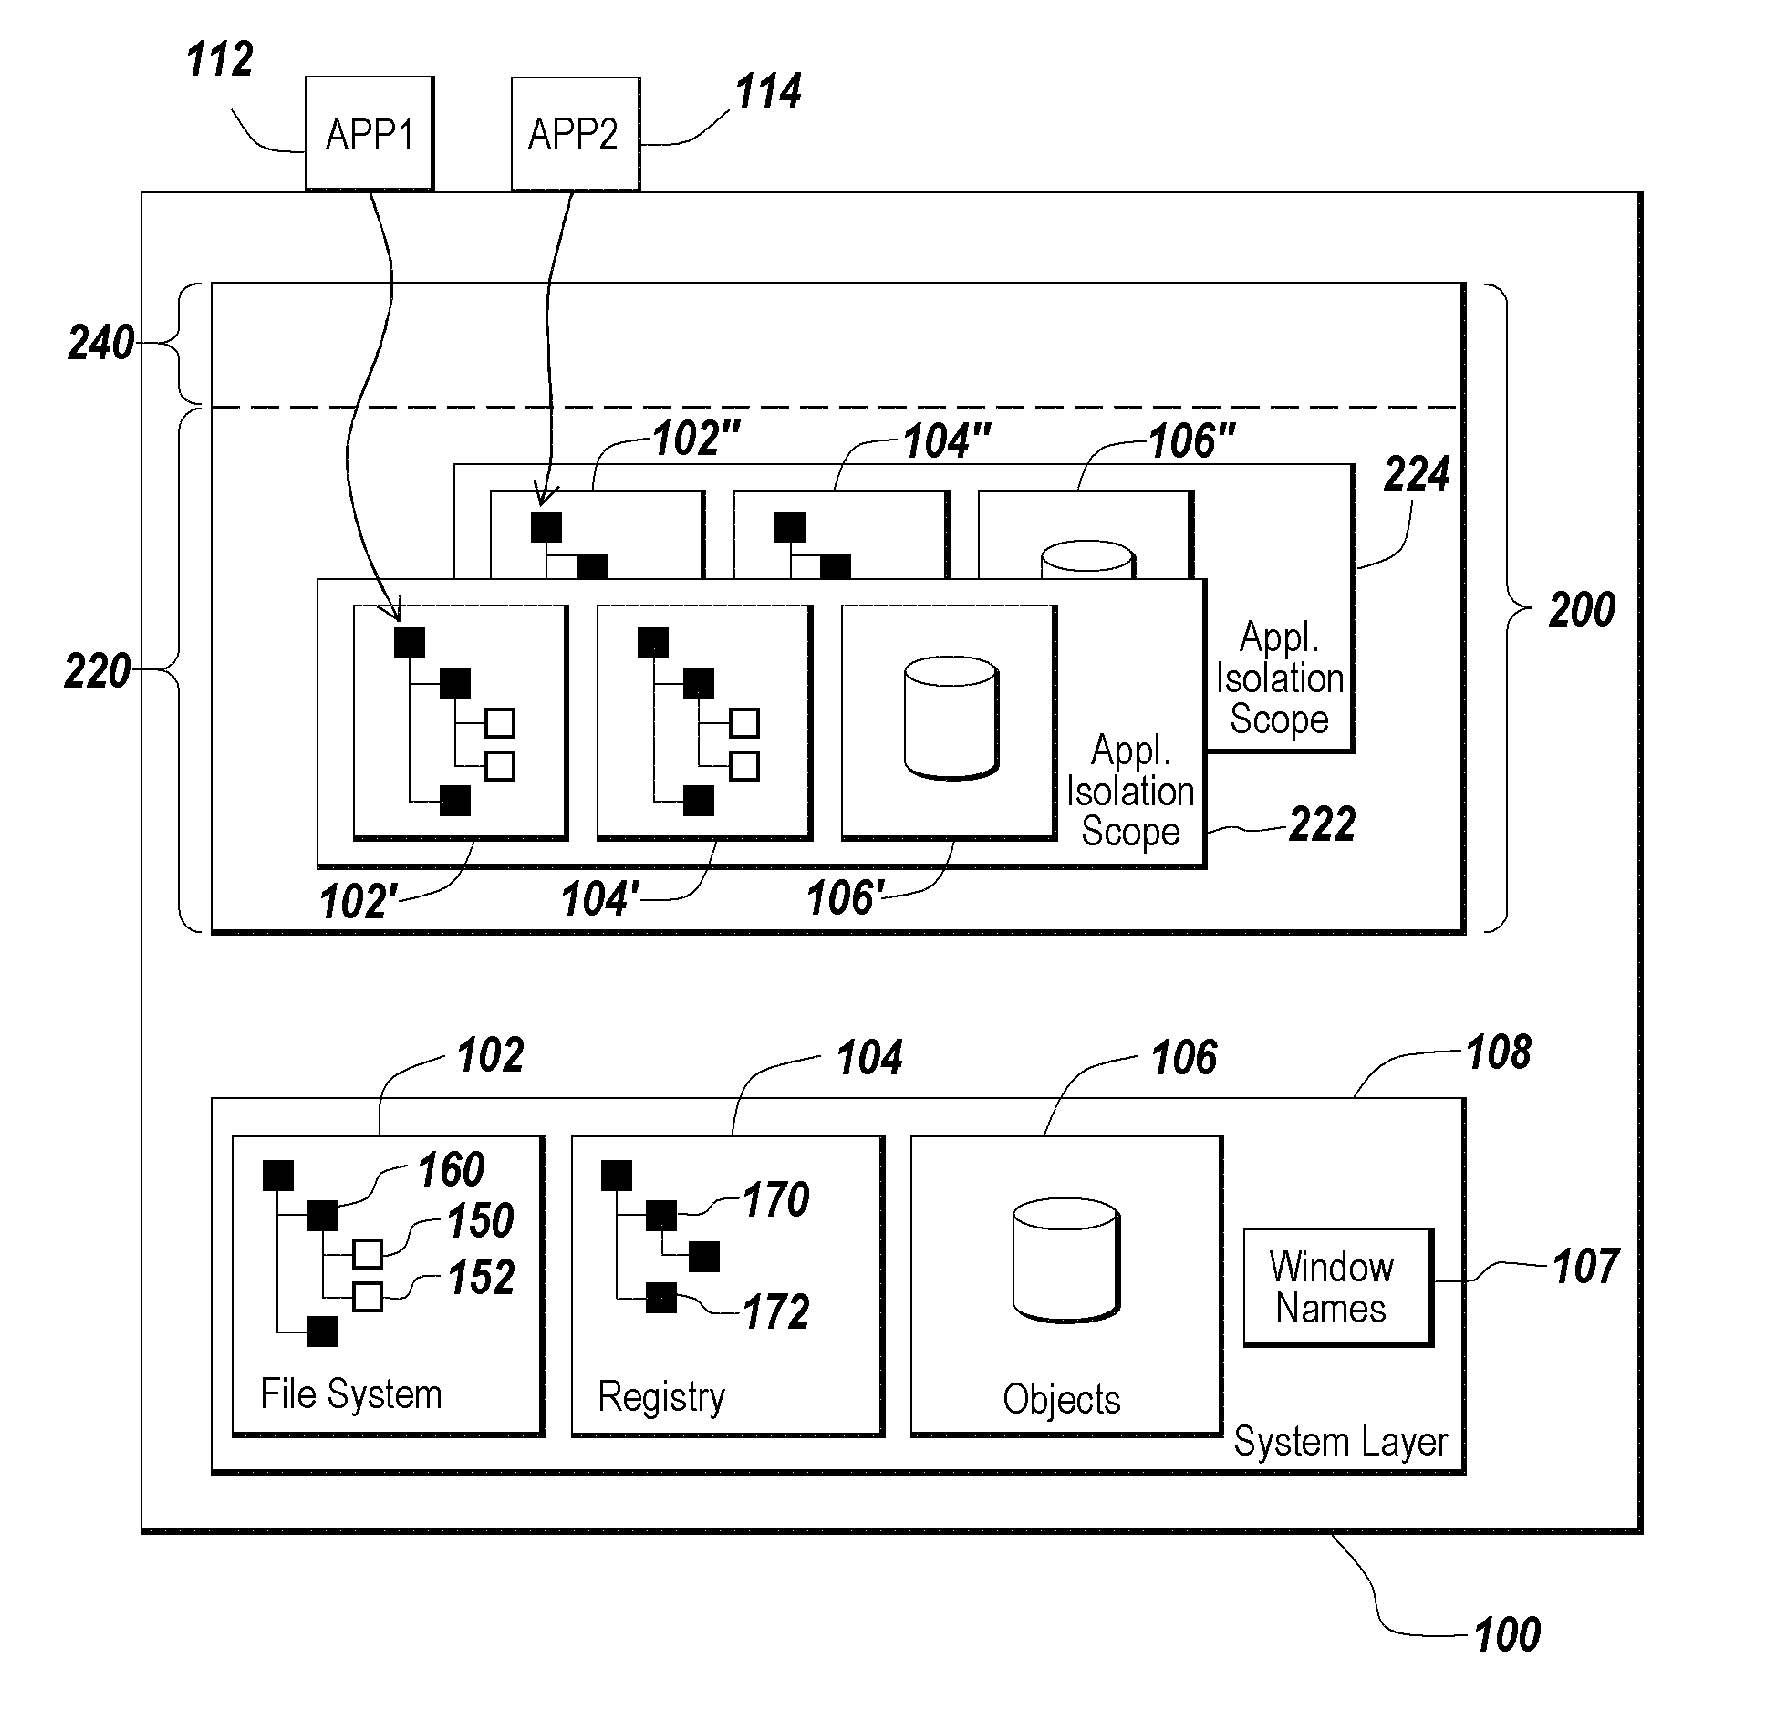 Method and apparatus for isolating execution of software applications